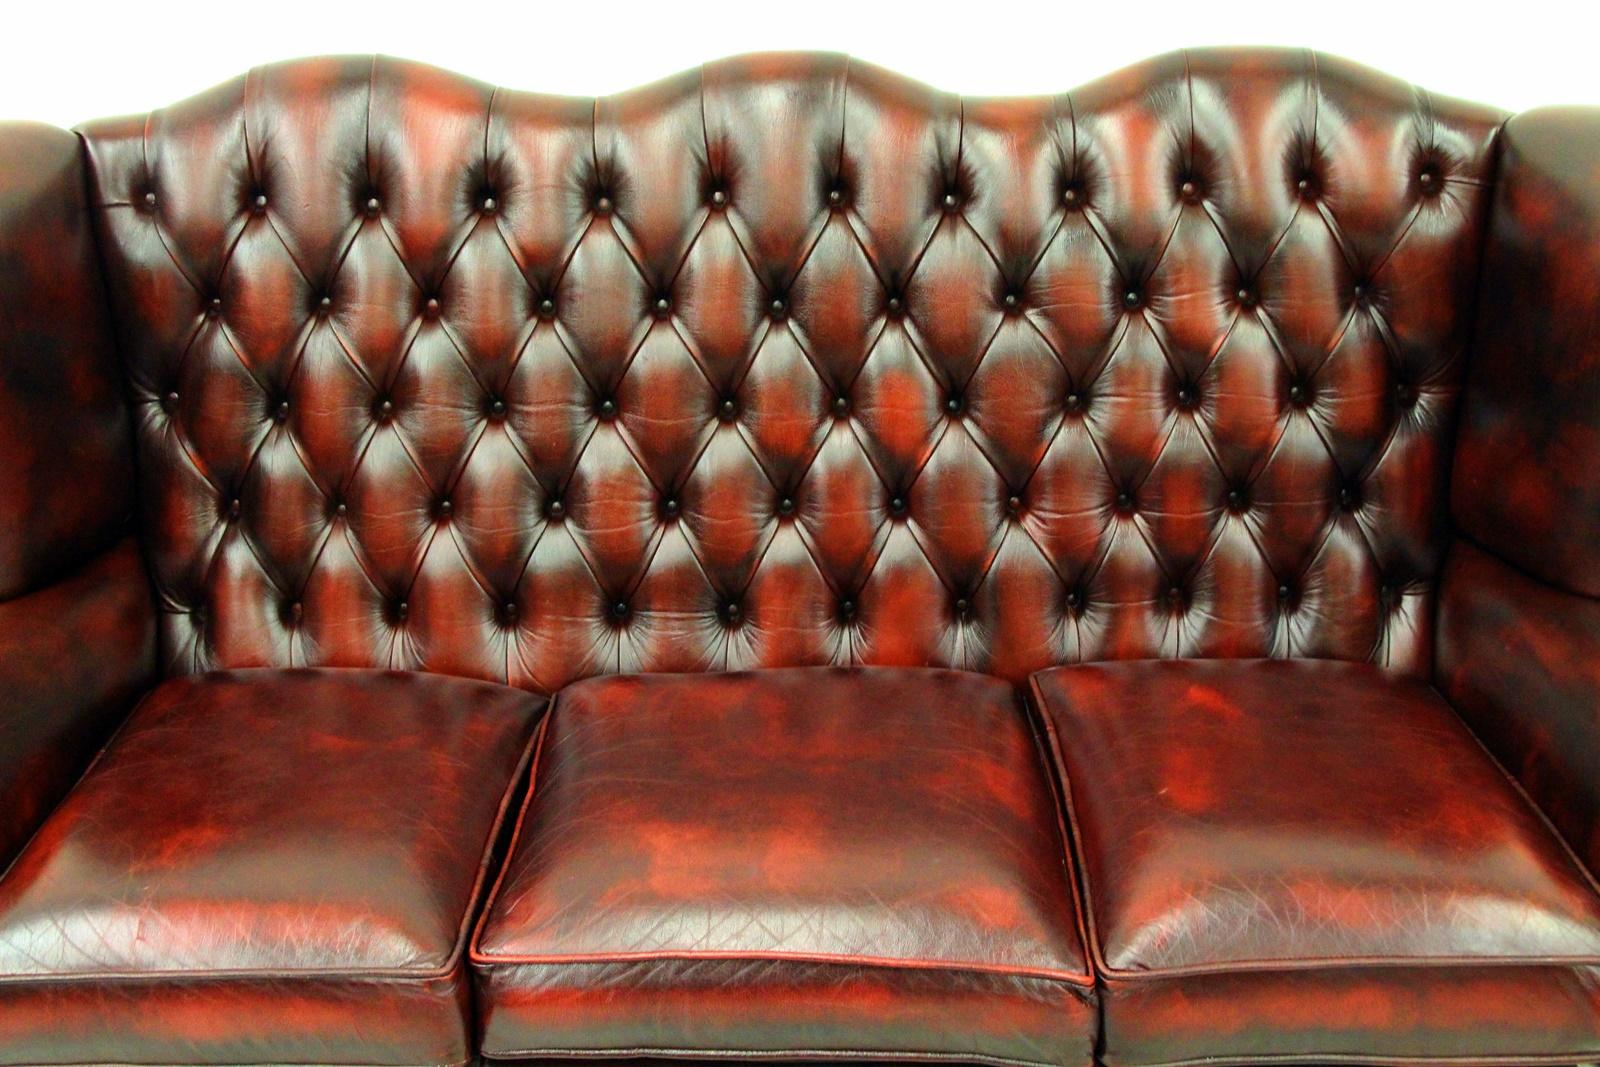 Chesterfield real leather threesome sofa
in an original design, the shape is especially beautiful

Condition: The sofa is in a very good condition
sofa
Measures: Height x 105cm length x 190cm depth x 80cm
Upholstery is in good condition with